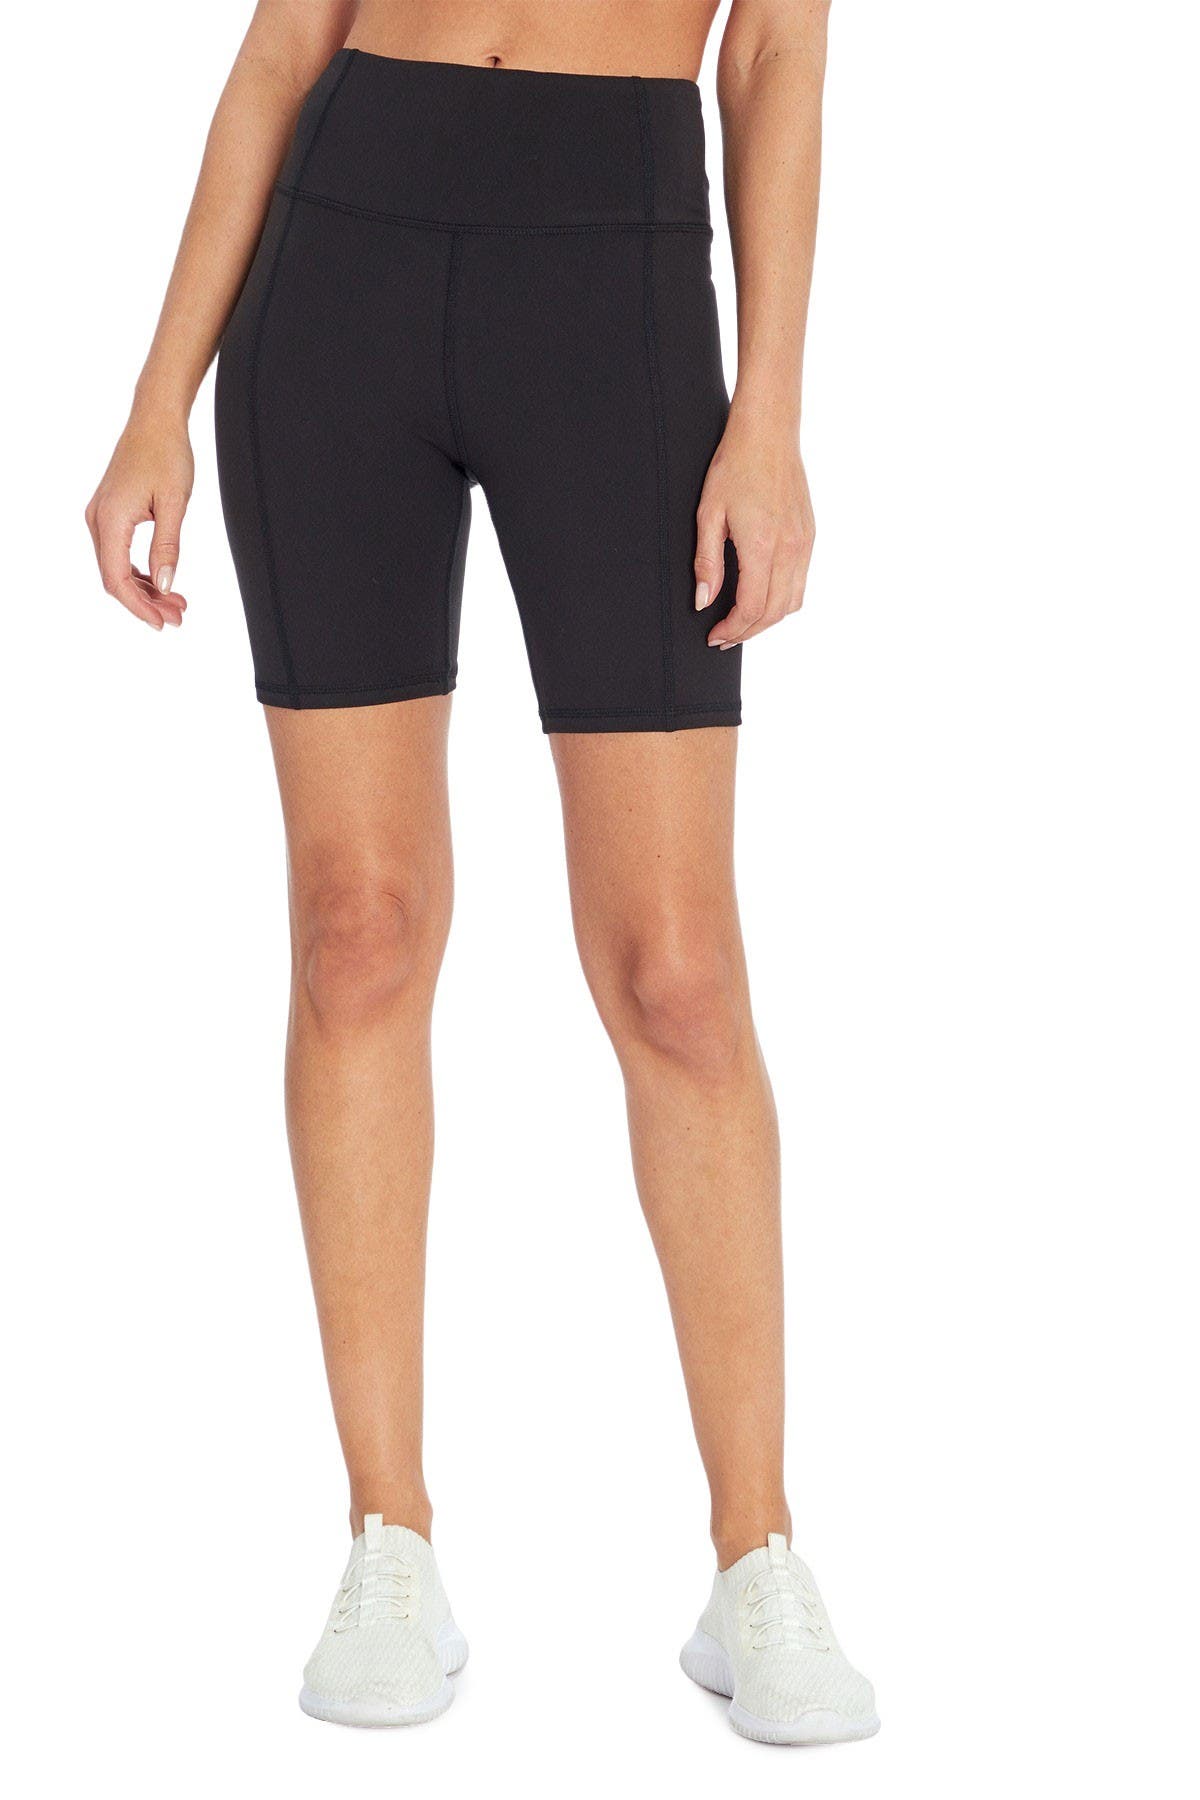 Jessica Simpson High Waisted Biker Shorts In Oxford1